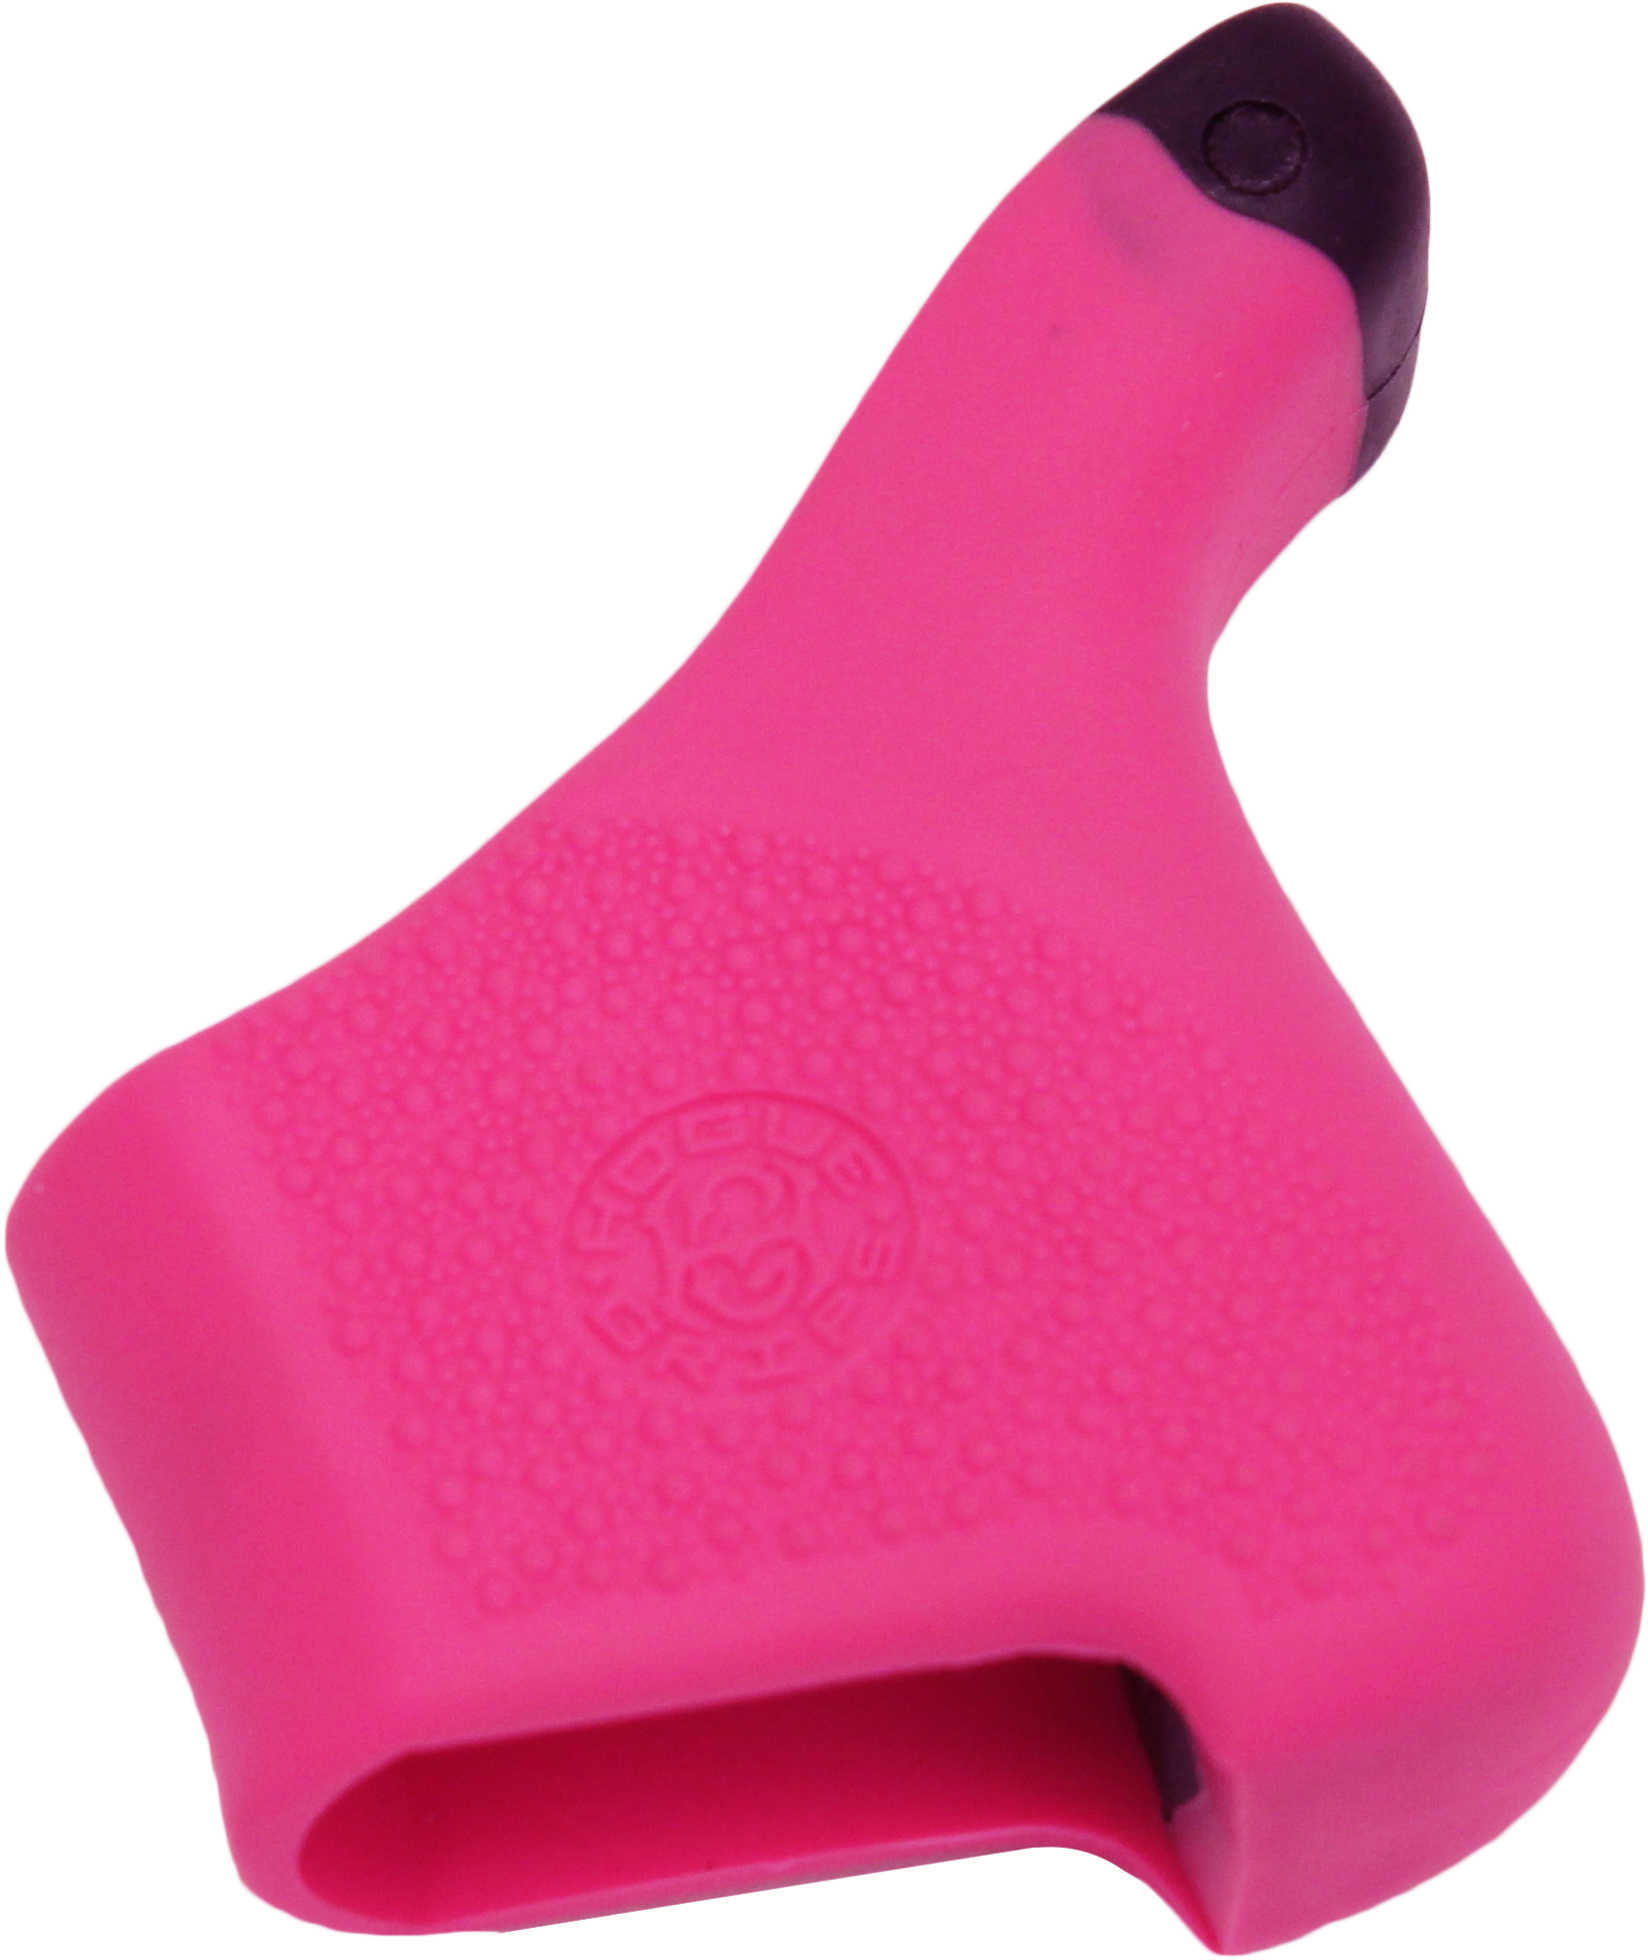 Hogue Grips HandAll Hybrid Ruger LCP Rubber Pink 18107